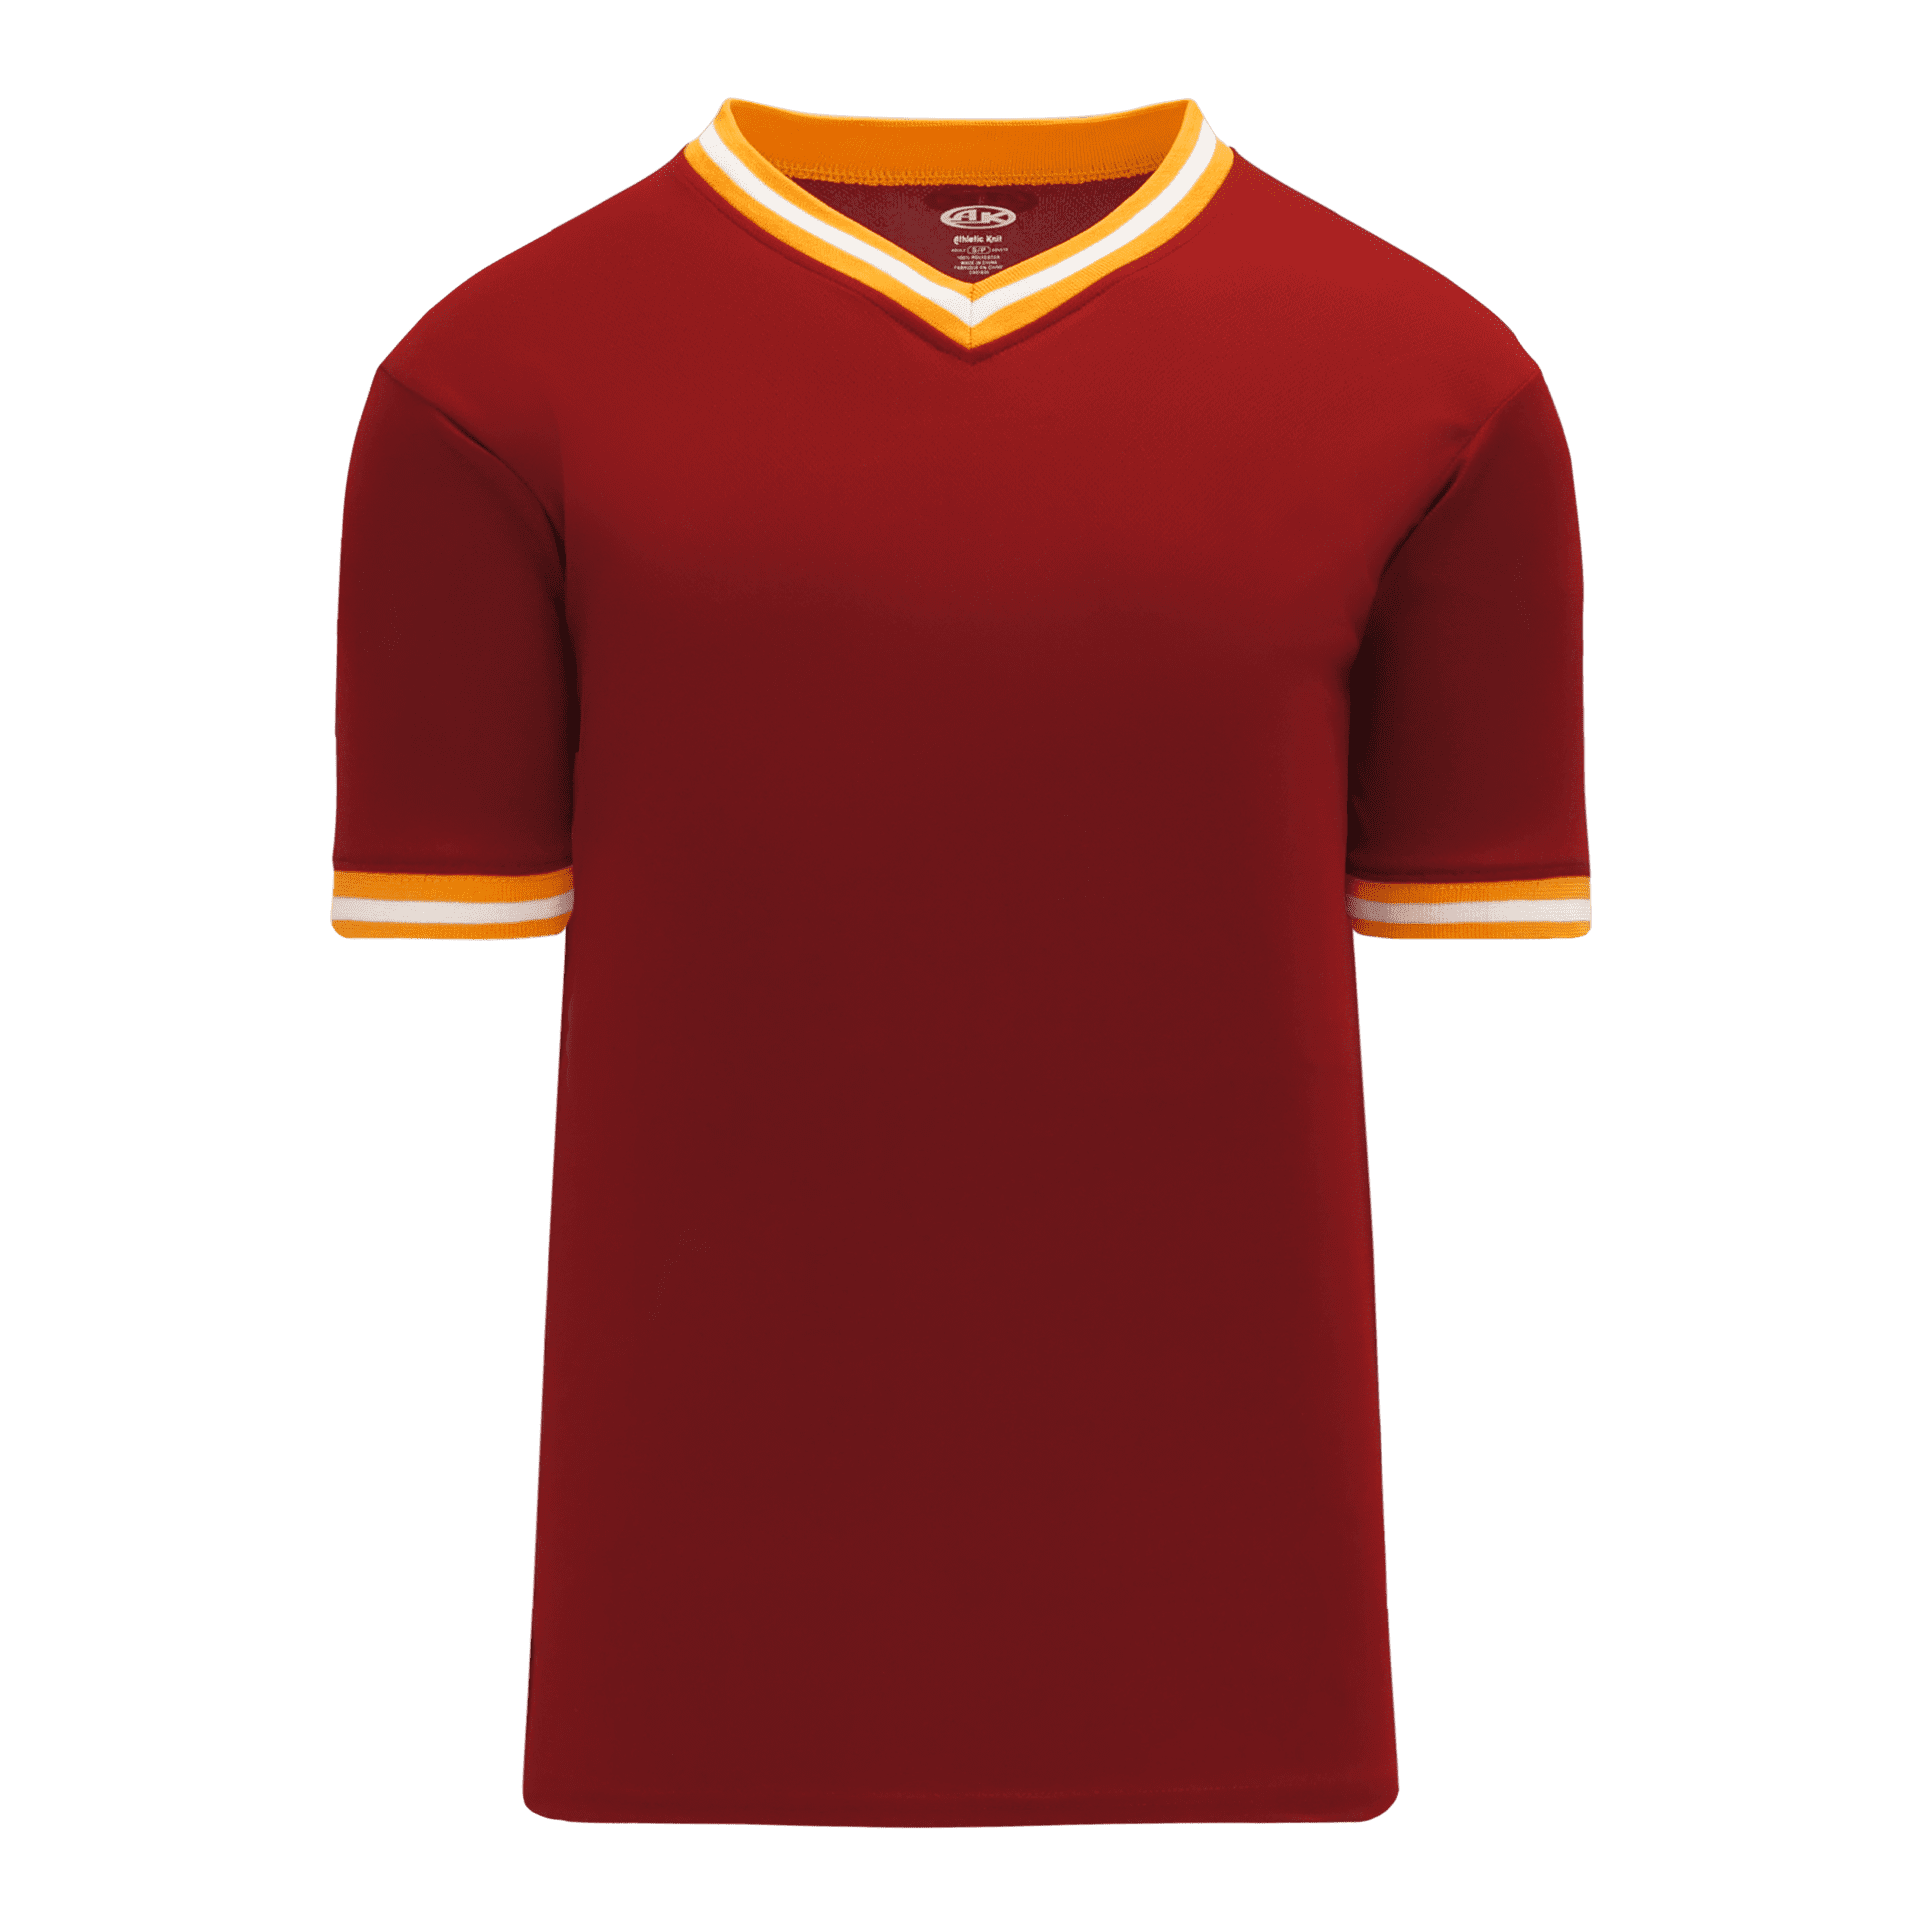 ATHLETIC KNIT PULLOVER BASEBALL JERSEY #BA1333 Maroon / Gold / White